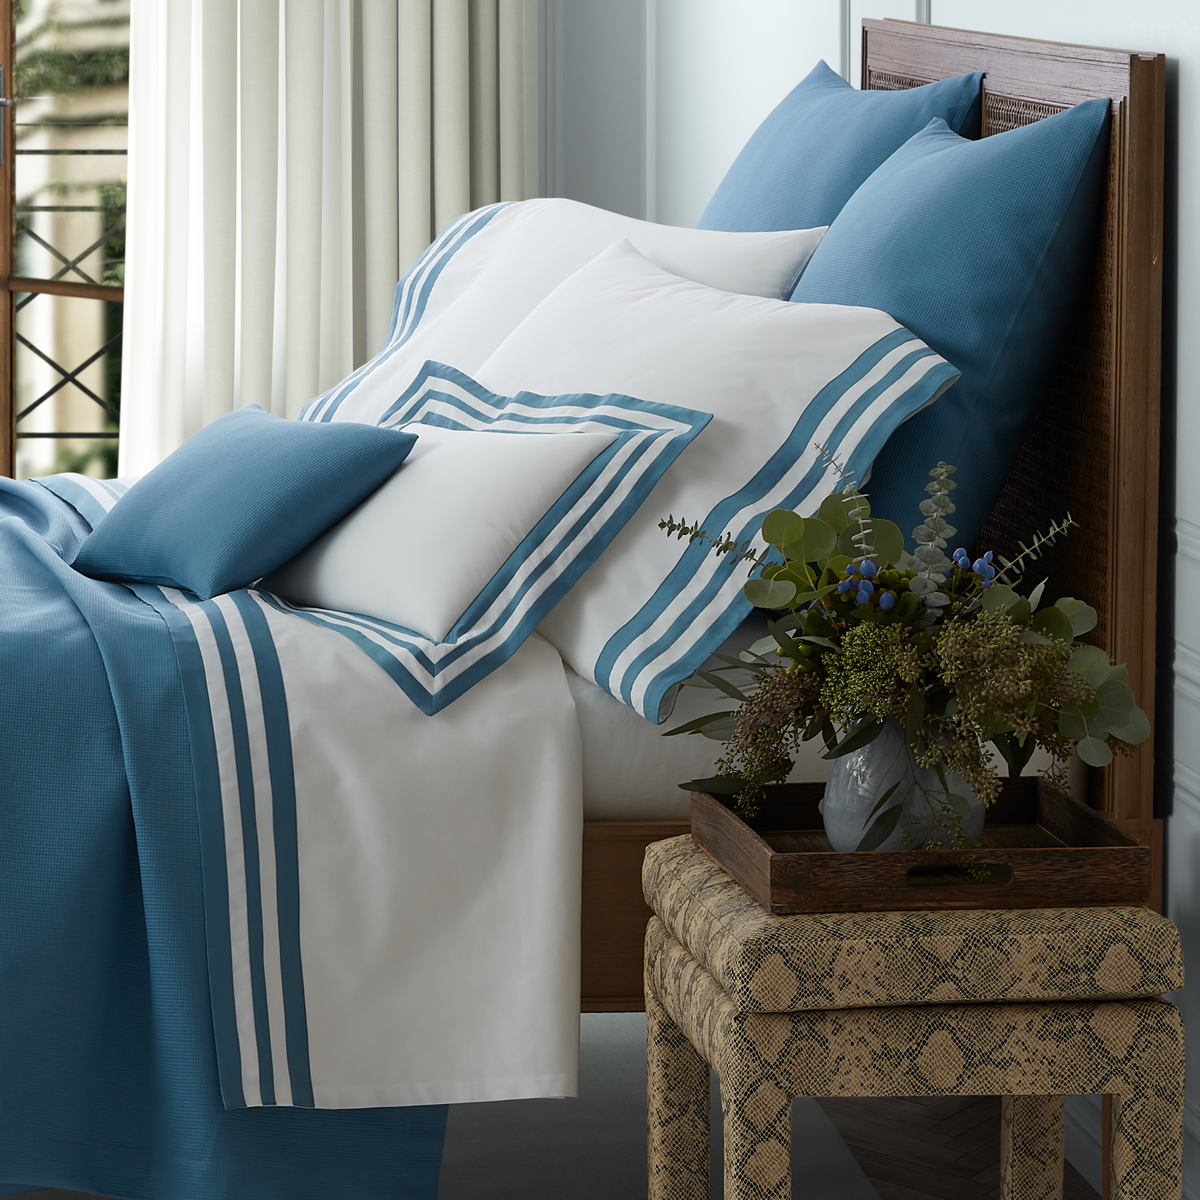 Side View of a Full Bed Dressed in Matouk Allegro Bedding in Sea Color